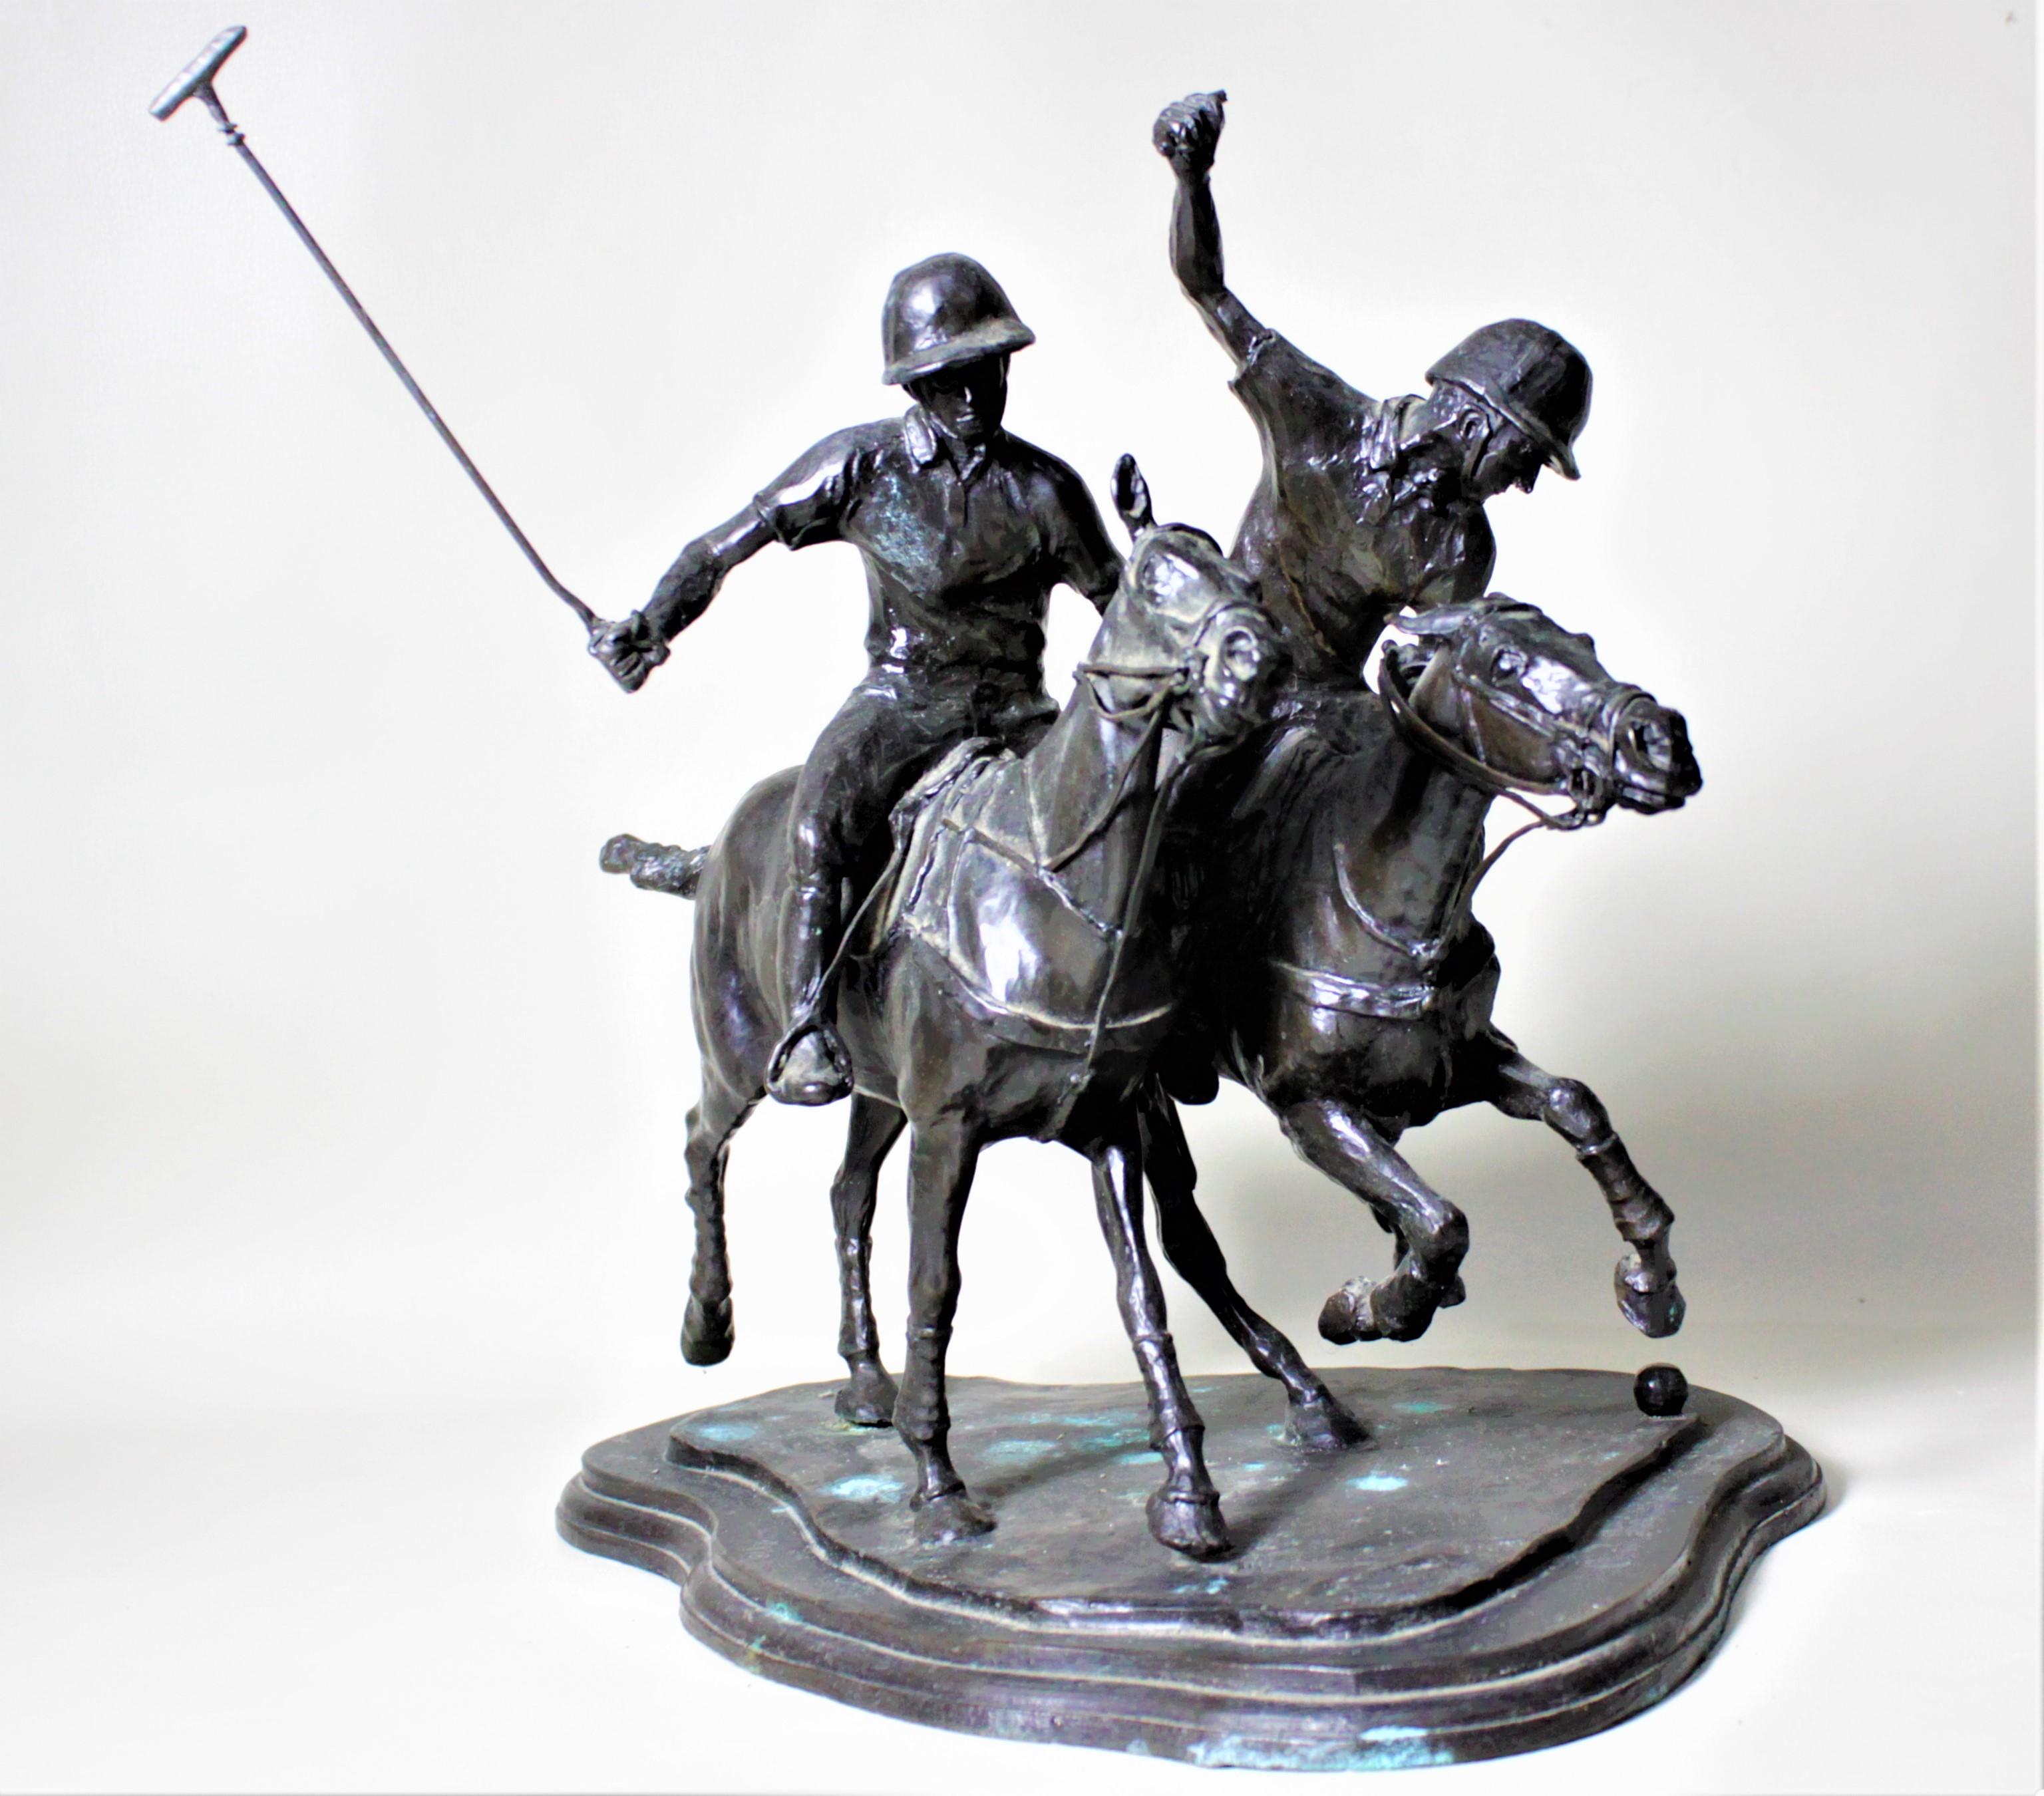 This large and substantial signed and numbered cast bronze sculpture was made in the early 20th century and is presumed to originate from France or England. There is a signature with the universal copyright mark on the rear of this bronze, but we